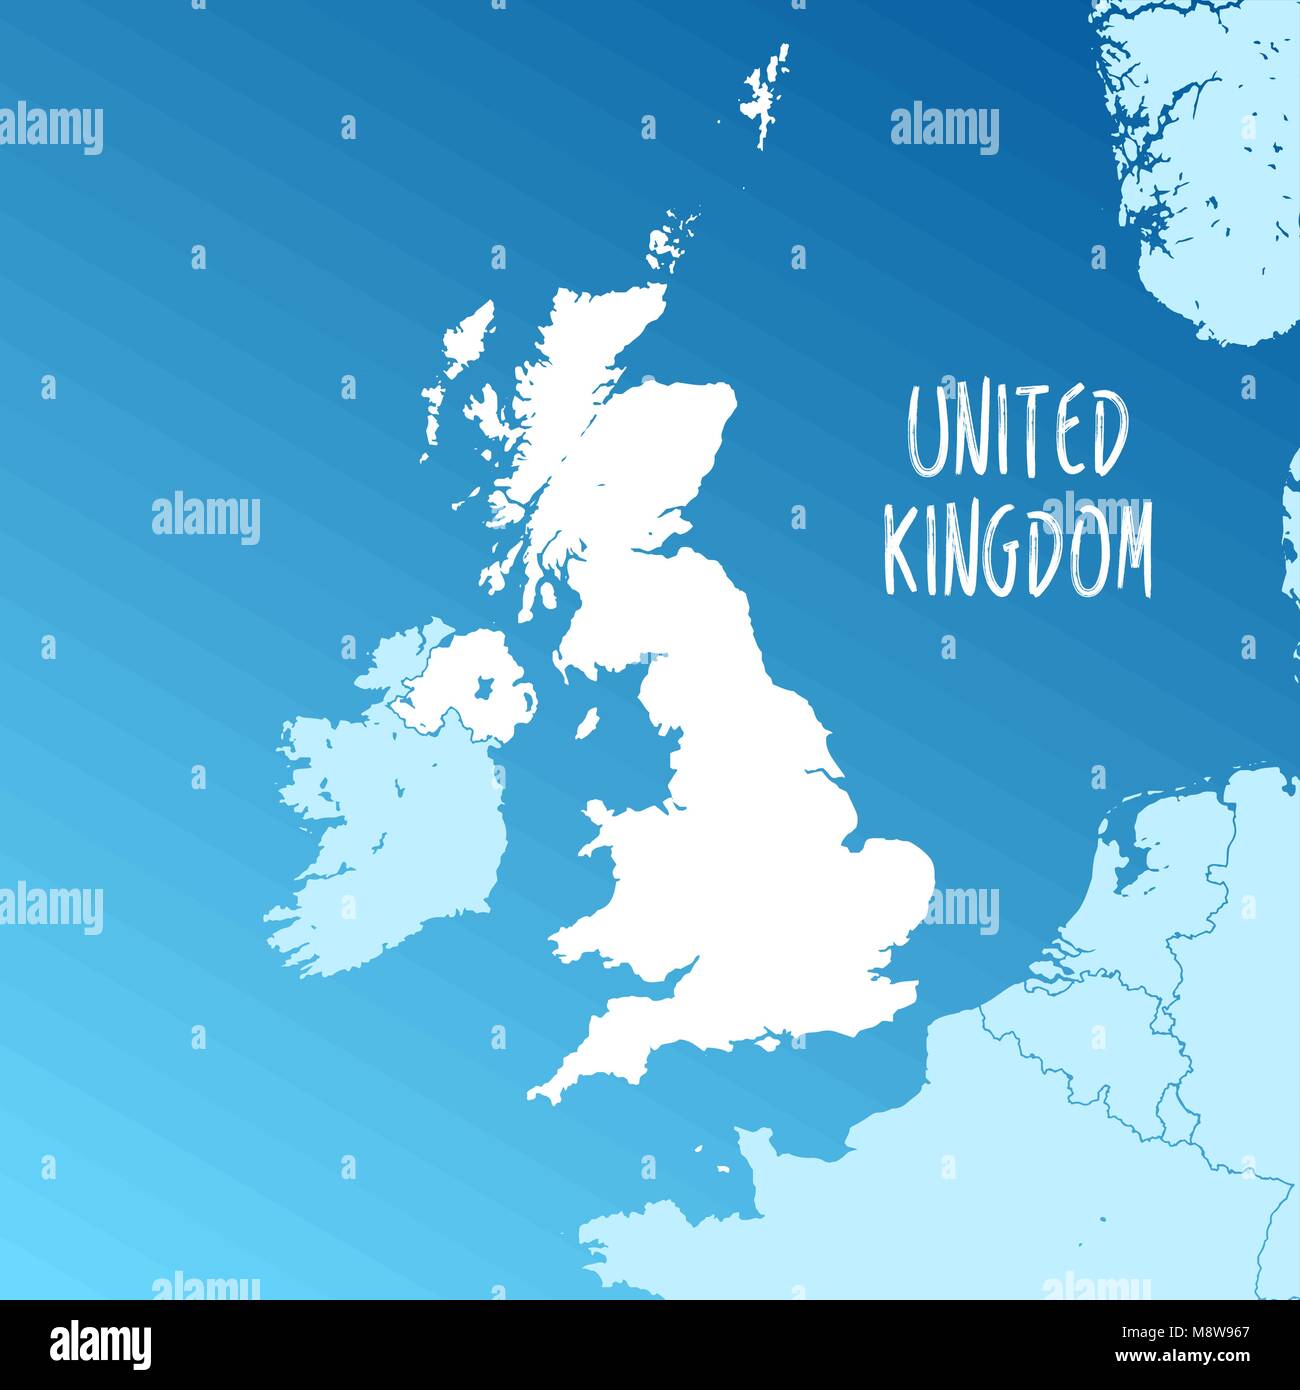 United Kingdom Vector Map. Two-toned Silhouette Version. Rich details for borders, neighbours and islands. Usable for travel marketing, real estate an Stock Vector